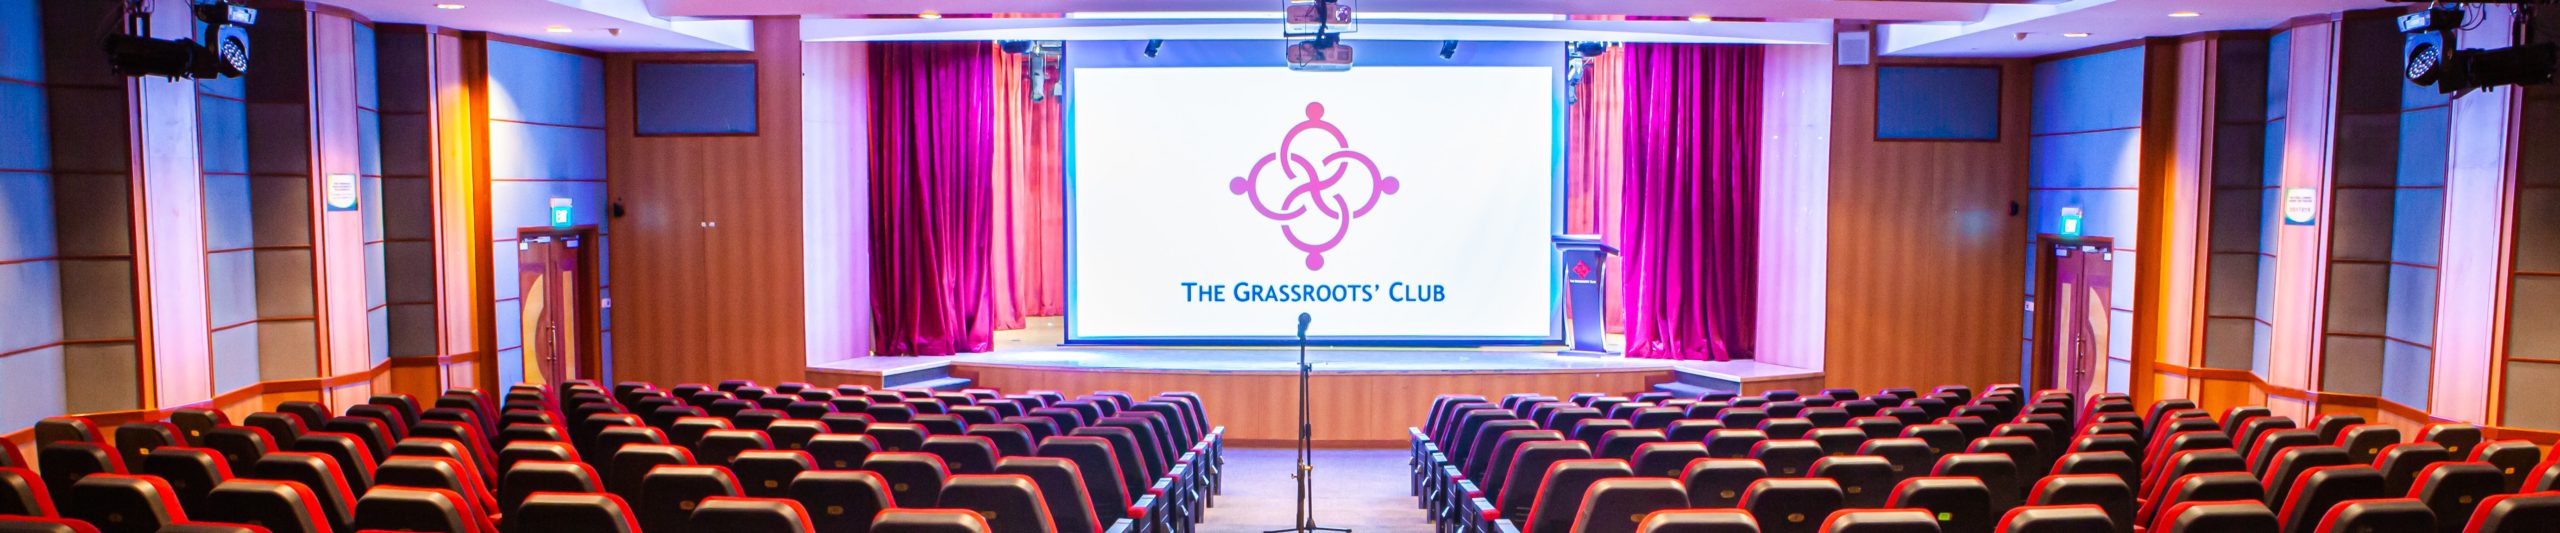 The Grassroot’s Club AGM